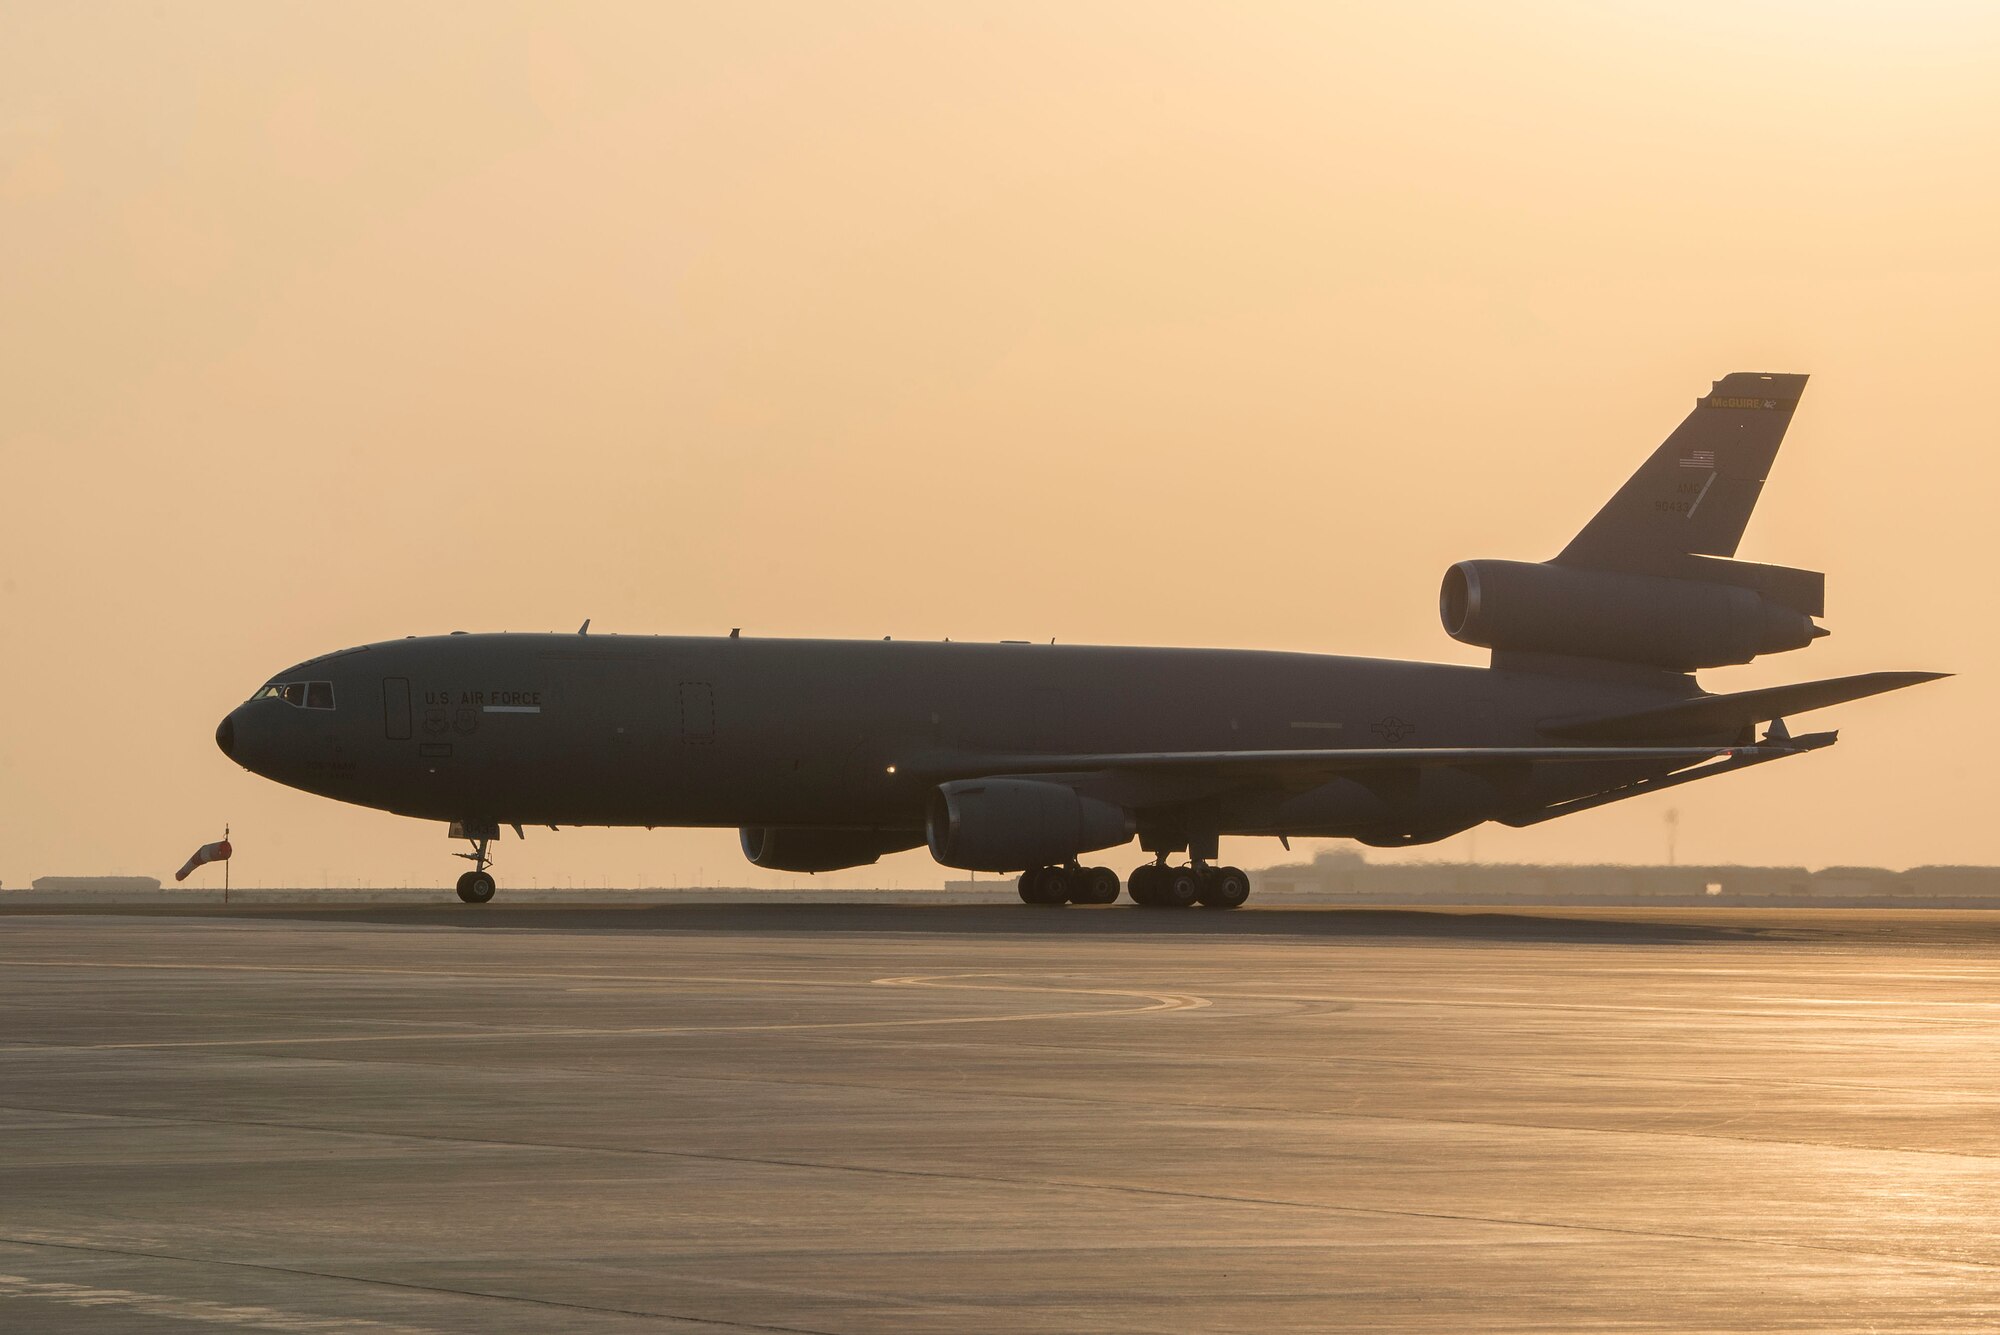 A U.S. Air Force KC-10 Extender assigned to the 908th Expeditionary Air Refueling Squadron taxis on the flightline upon landing at Al Dhafra Air Base, United Arab Emirates, Nov. 16, 2020.